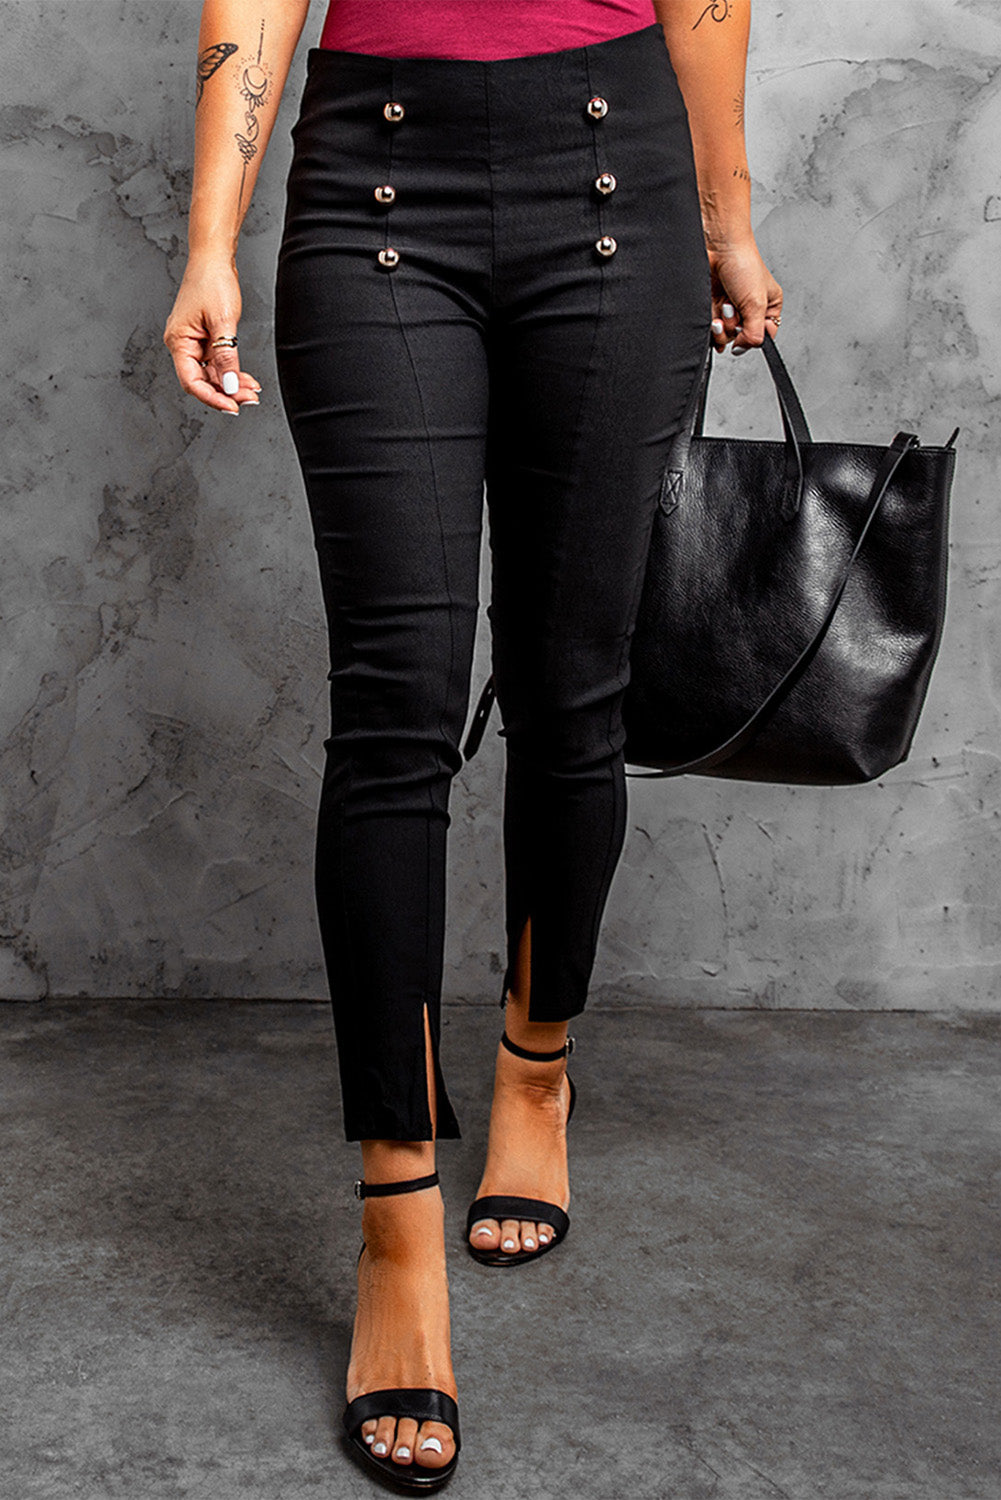 Womens Black Buttons Skinny Pants with Slits